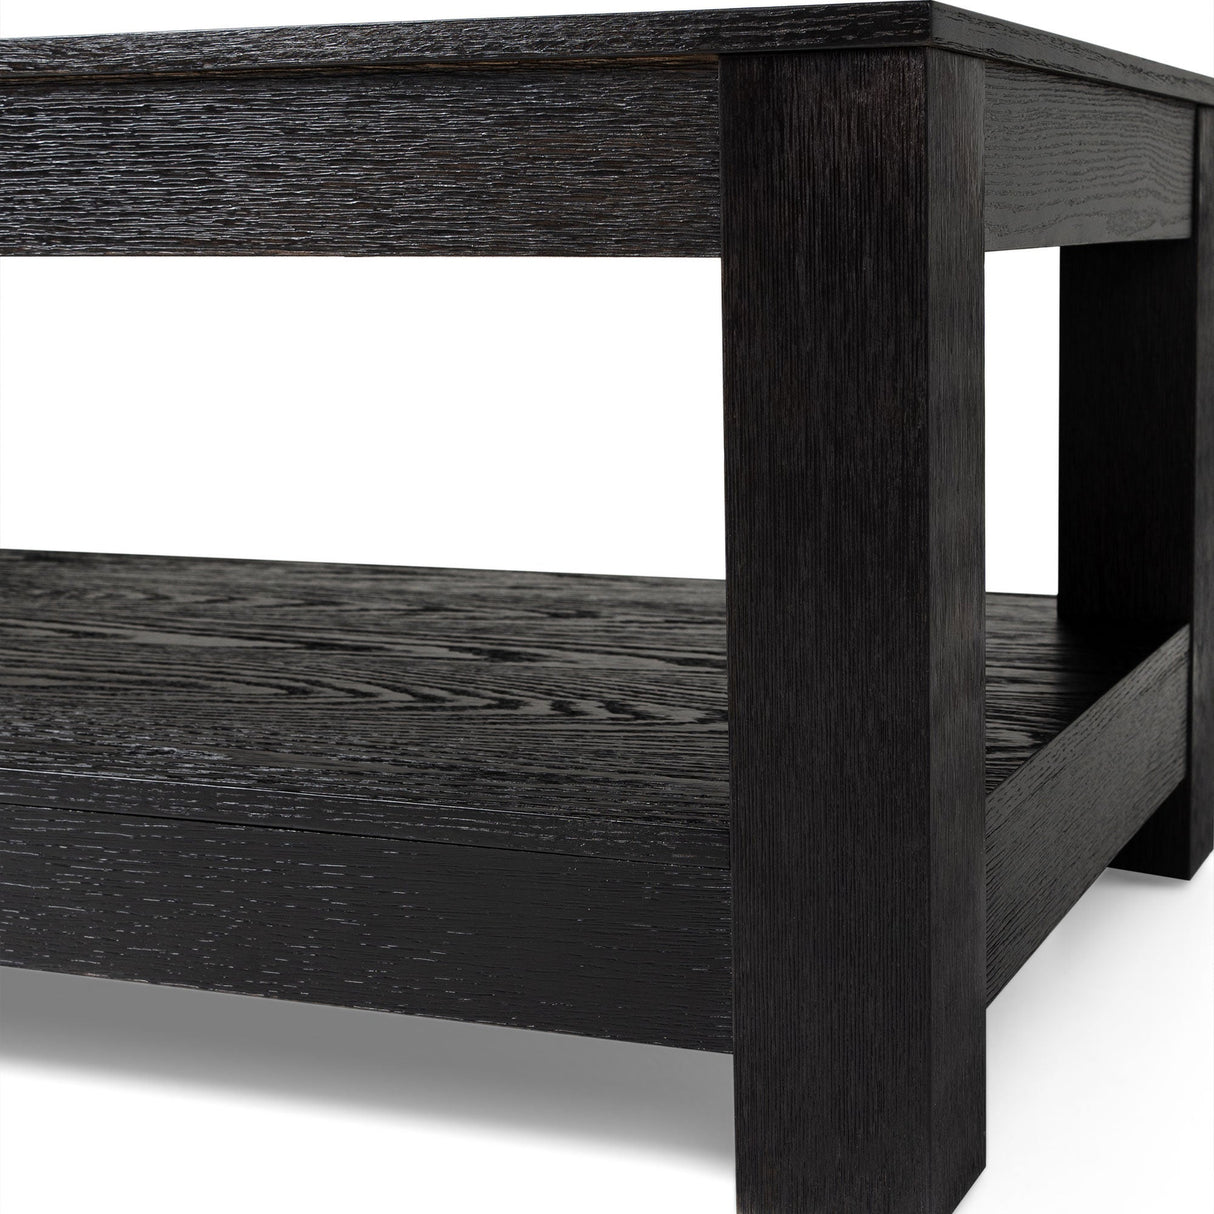 Maven Lane Paulo Wooden Coffee Table in Weathered Black Finish